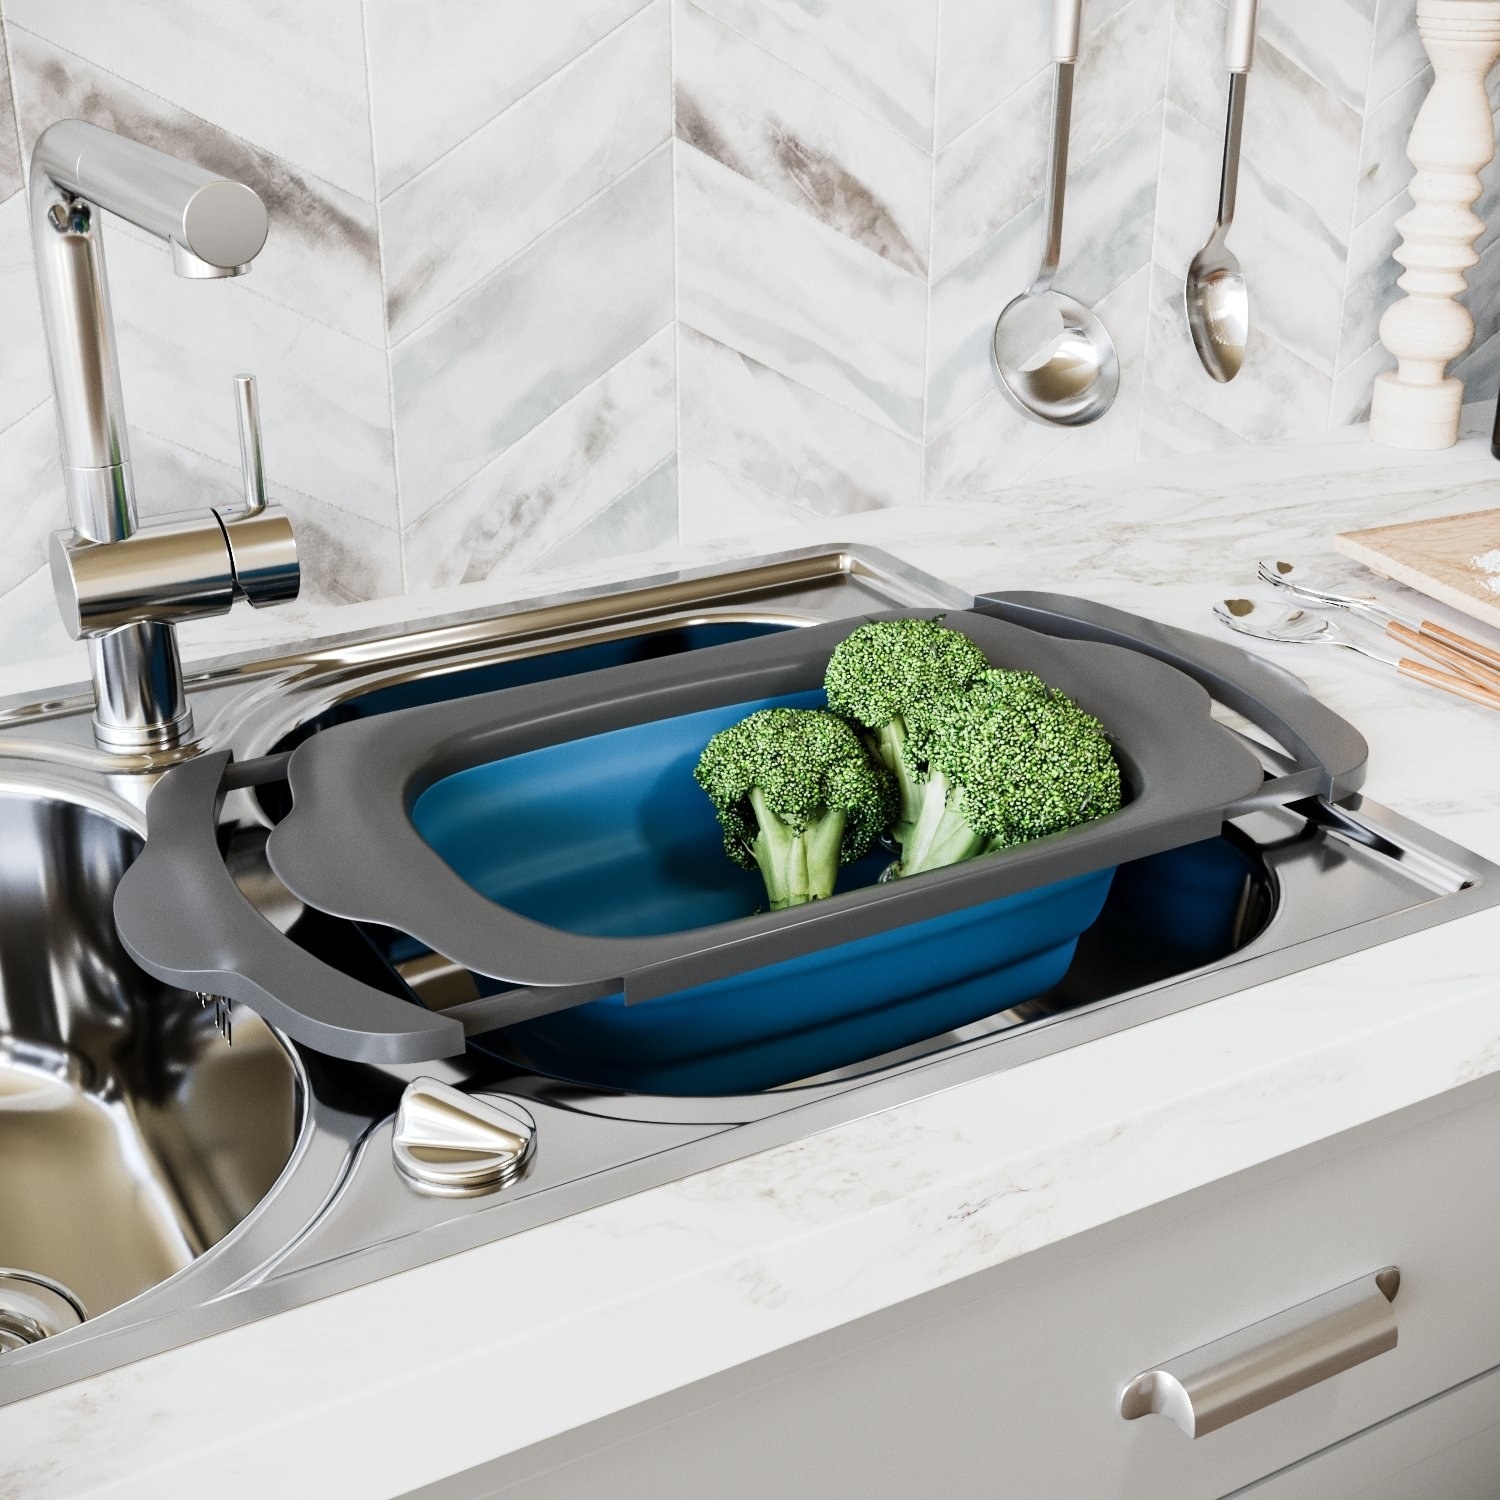 A large silicone colander resting on the edge of a the sink and filled with broccoli